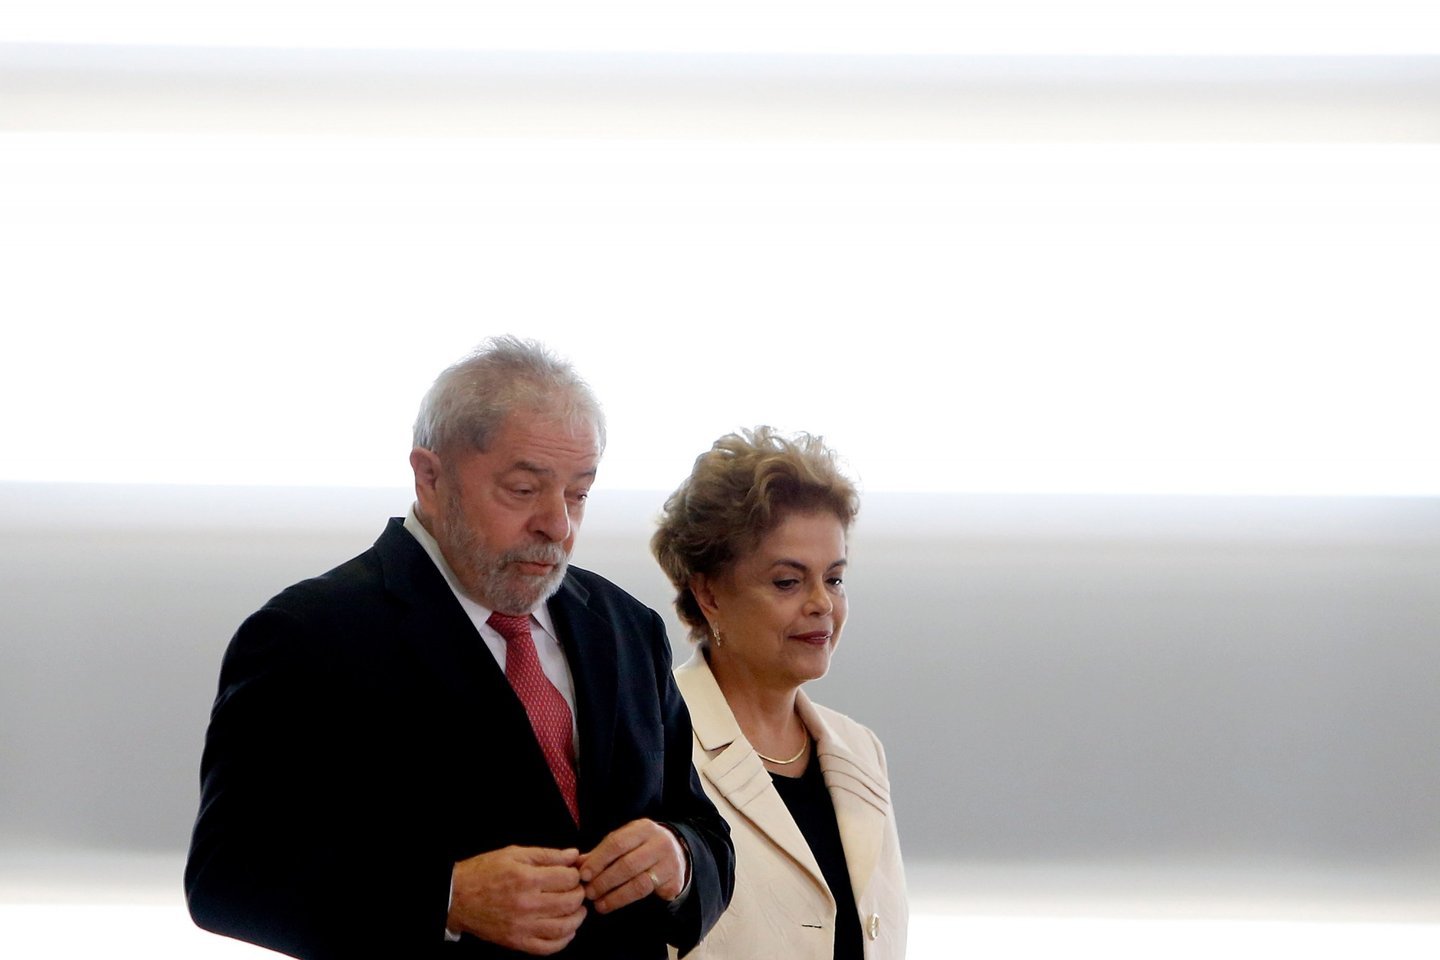 BRASILIA, BRAZIL - MARCH 17: Brazil's former president, Luiz Inacio Lula da Silva (L) walks with President Dilma Rousseff as he is sworn in as the new chief of staff in the Planalto Palace on March 17, 2016 in Brasilia, Brazil. His controversial cabinet appointment comes in the wake of a massive corruption scandal and economic recession in Brazil. (Photo by Igo Estrela/Getty Images)